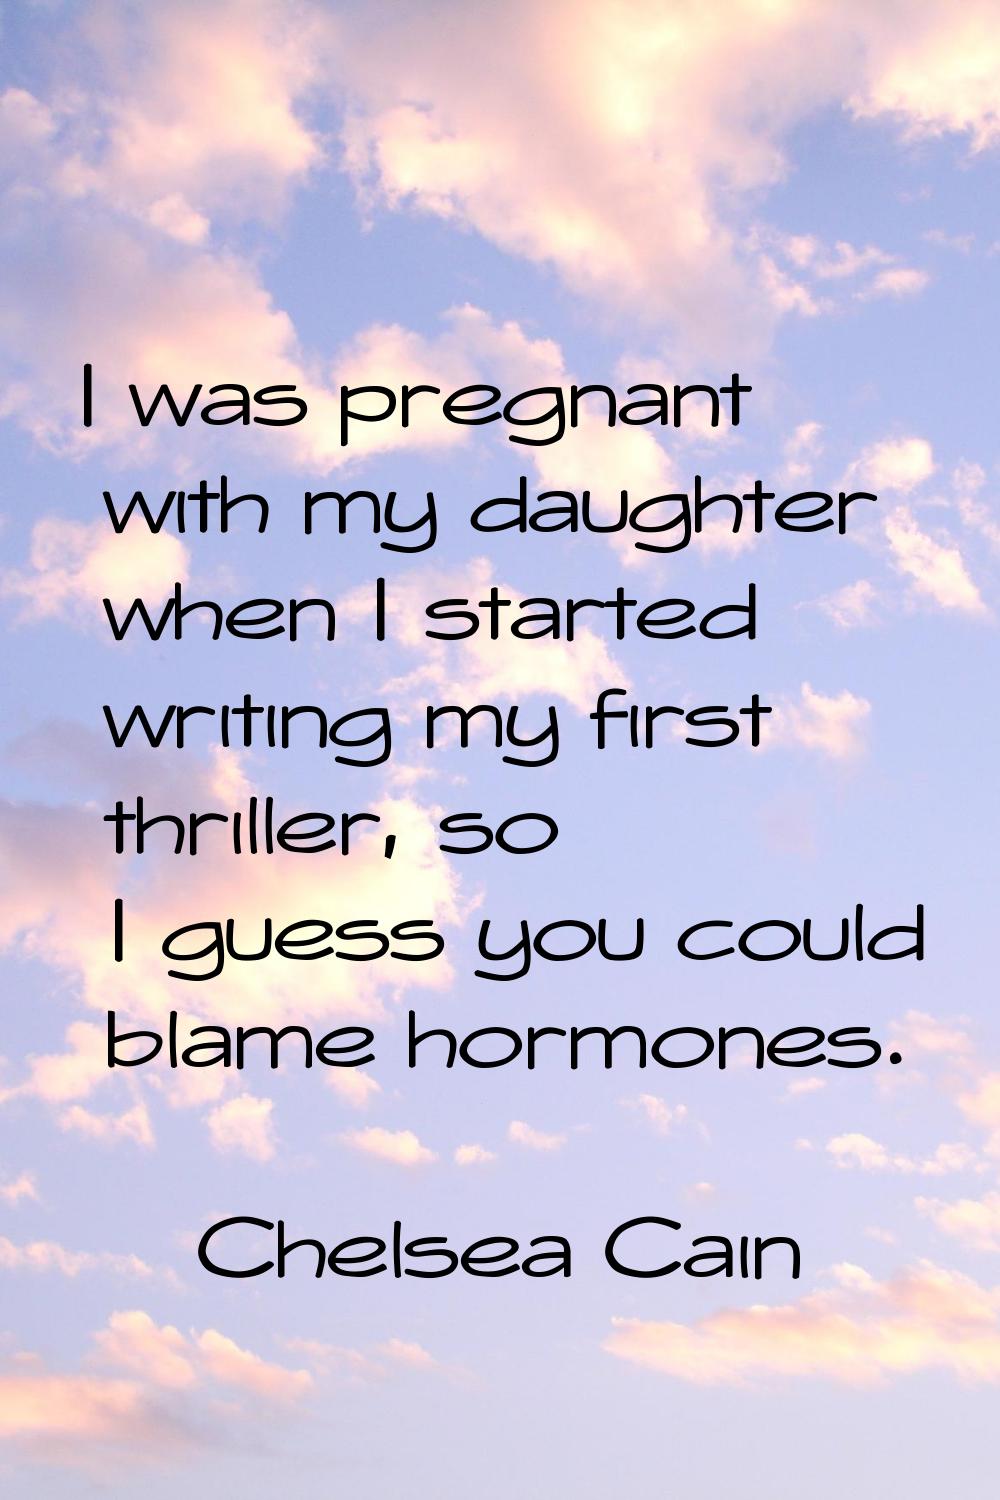 I was pregnant with my daughter when I started writing my first thriller, so I guess you could blam